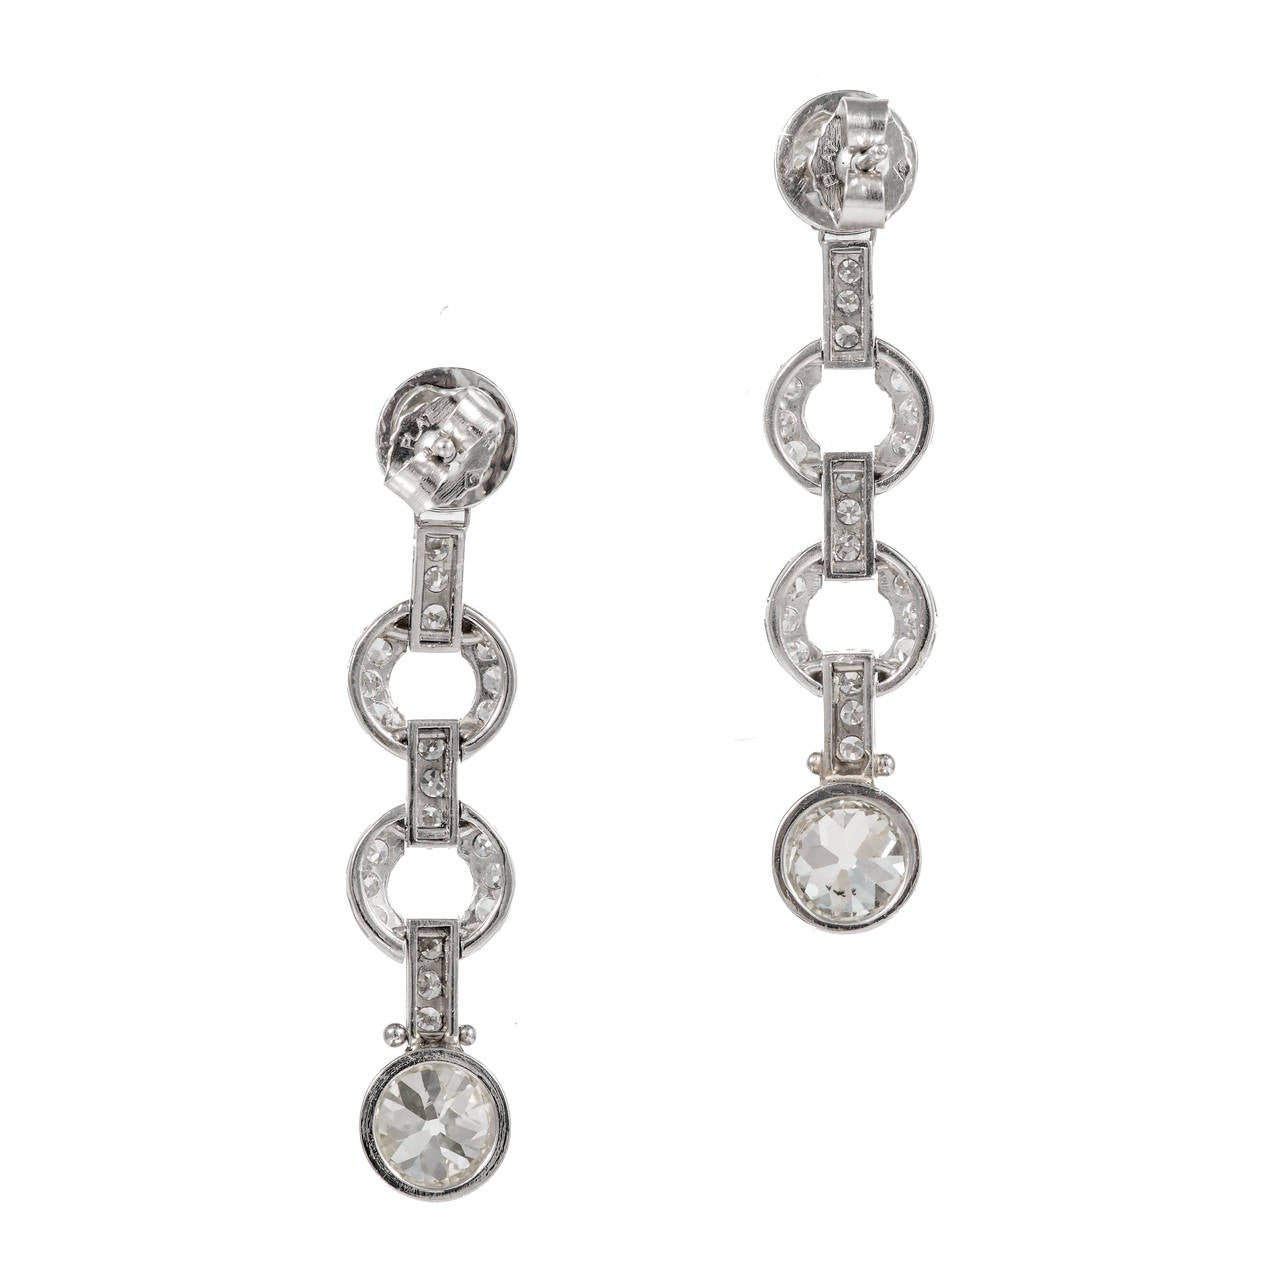 Solid Platinum handmade hinged dangle diamond earrings, set with 4 bright old European cut diamonds and single cut diamonds in the connecting links. 

4 round diamonds approx. total weight 3.25cts, H, VS2 – SI1.
42 round diamonds approx. total